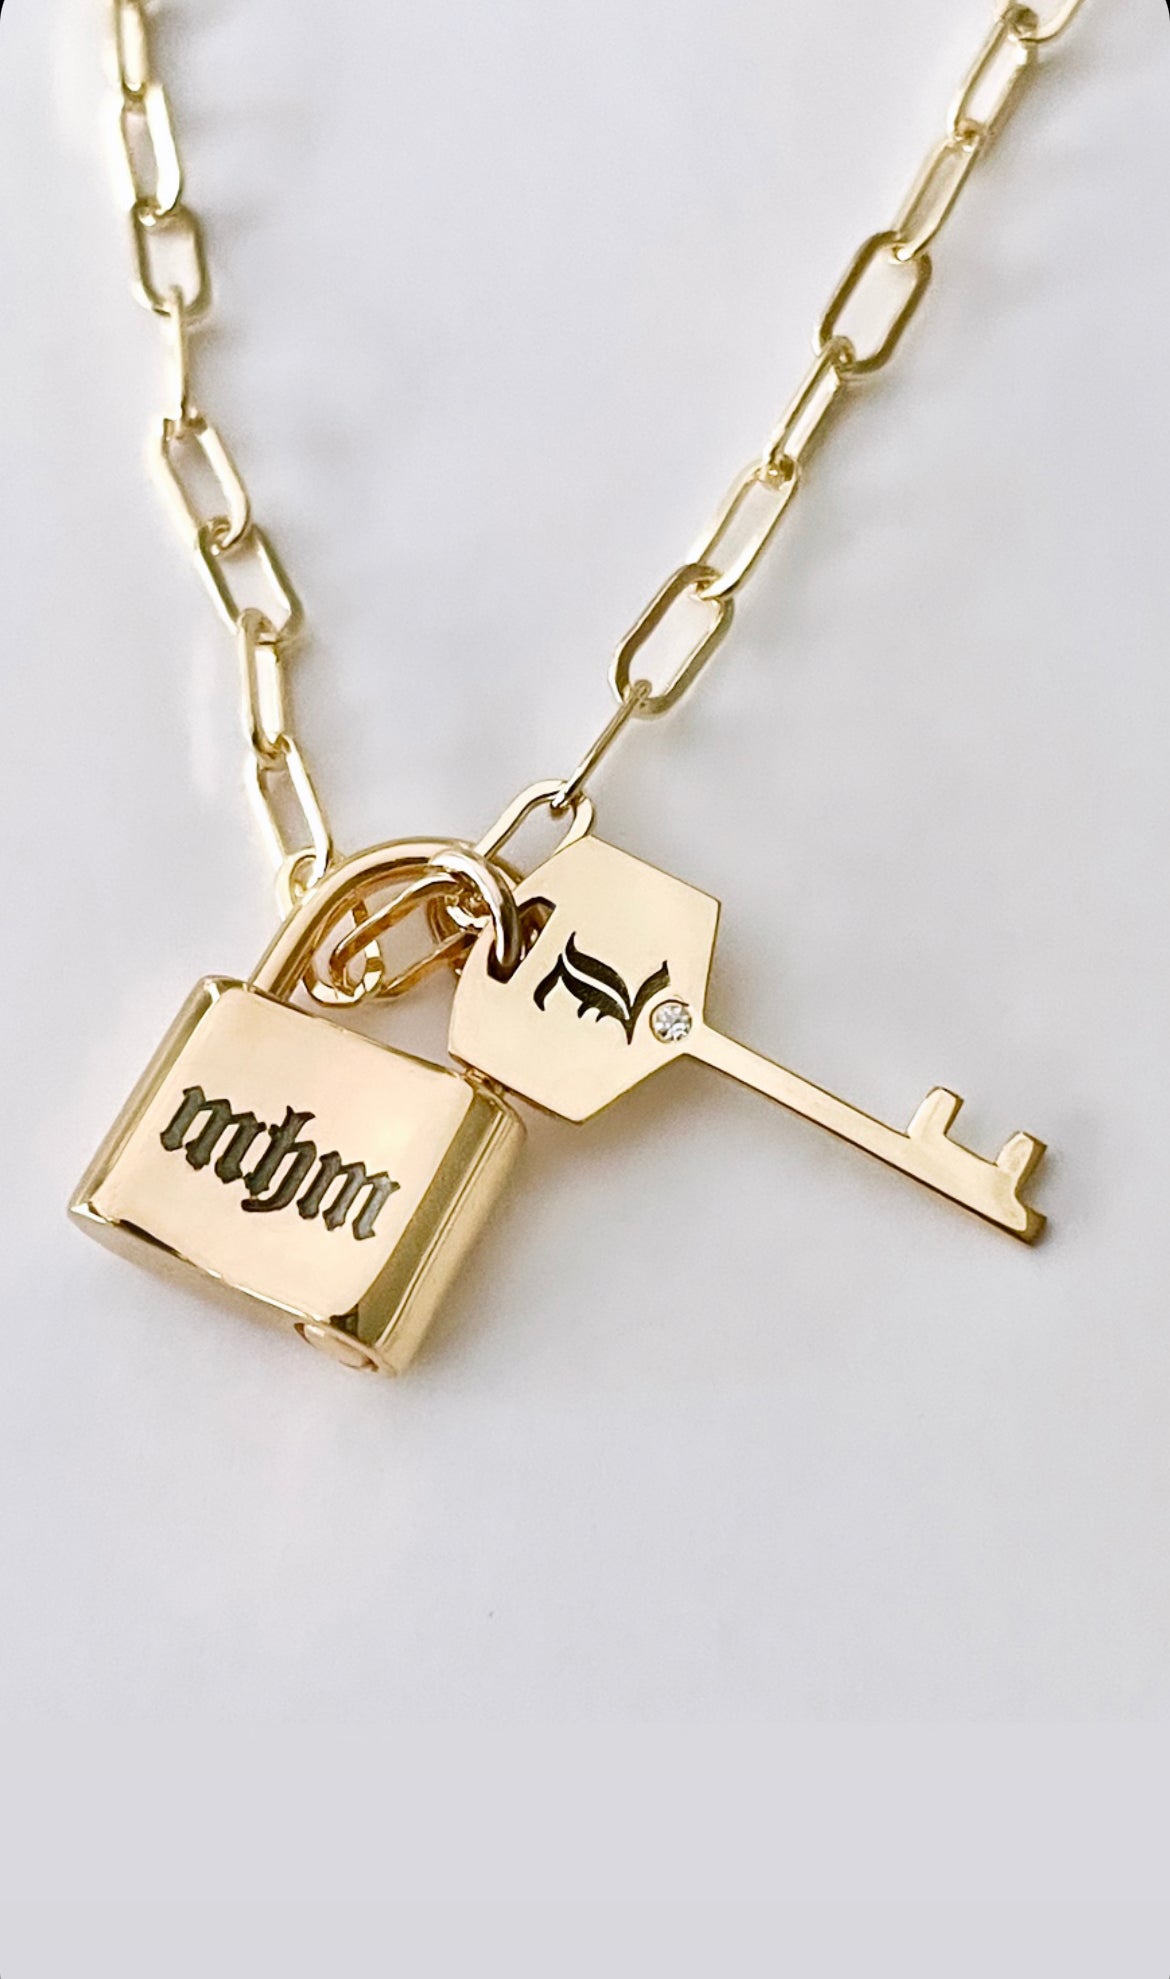 Sarah Personalized Lock and Key Necklace Sterling Silver Pendant with Gold-Filled Chain / 18